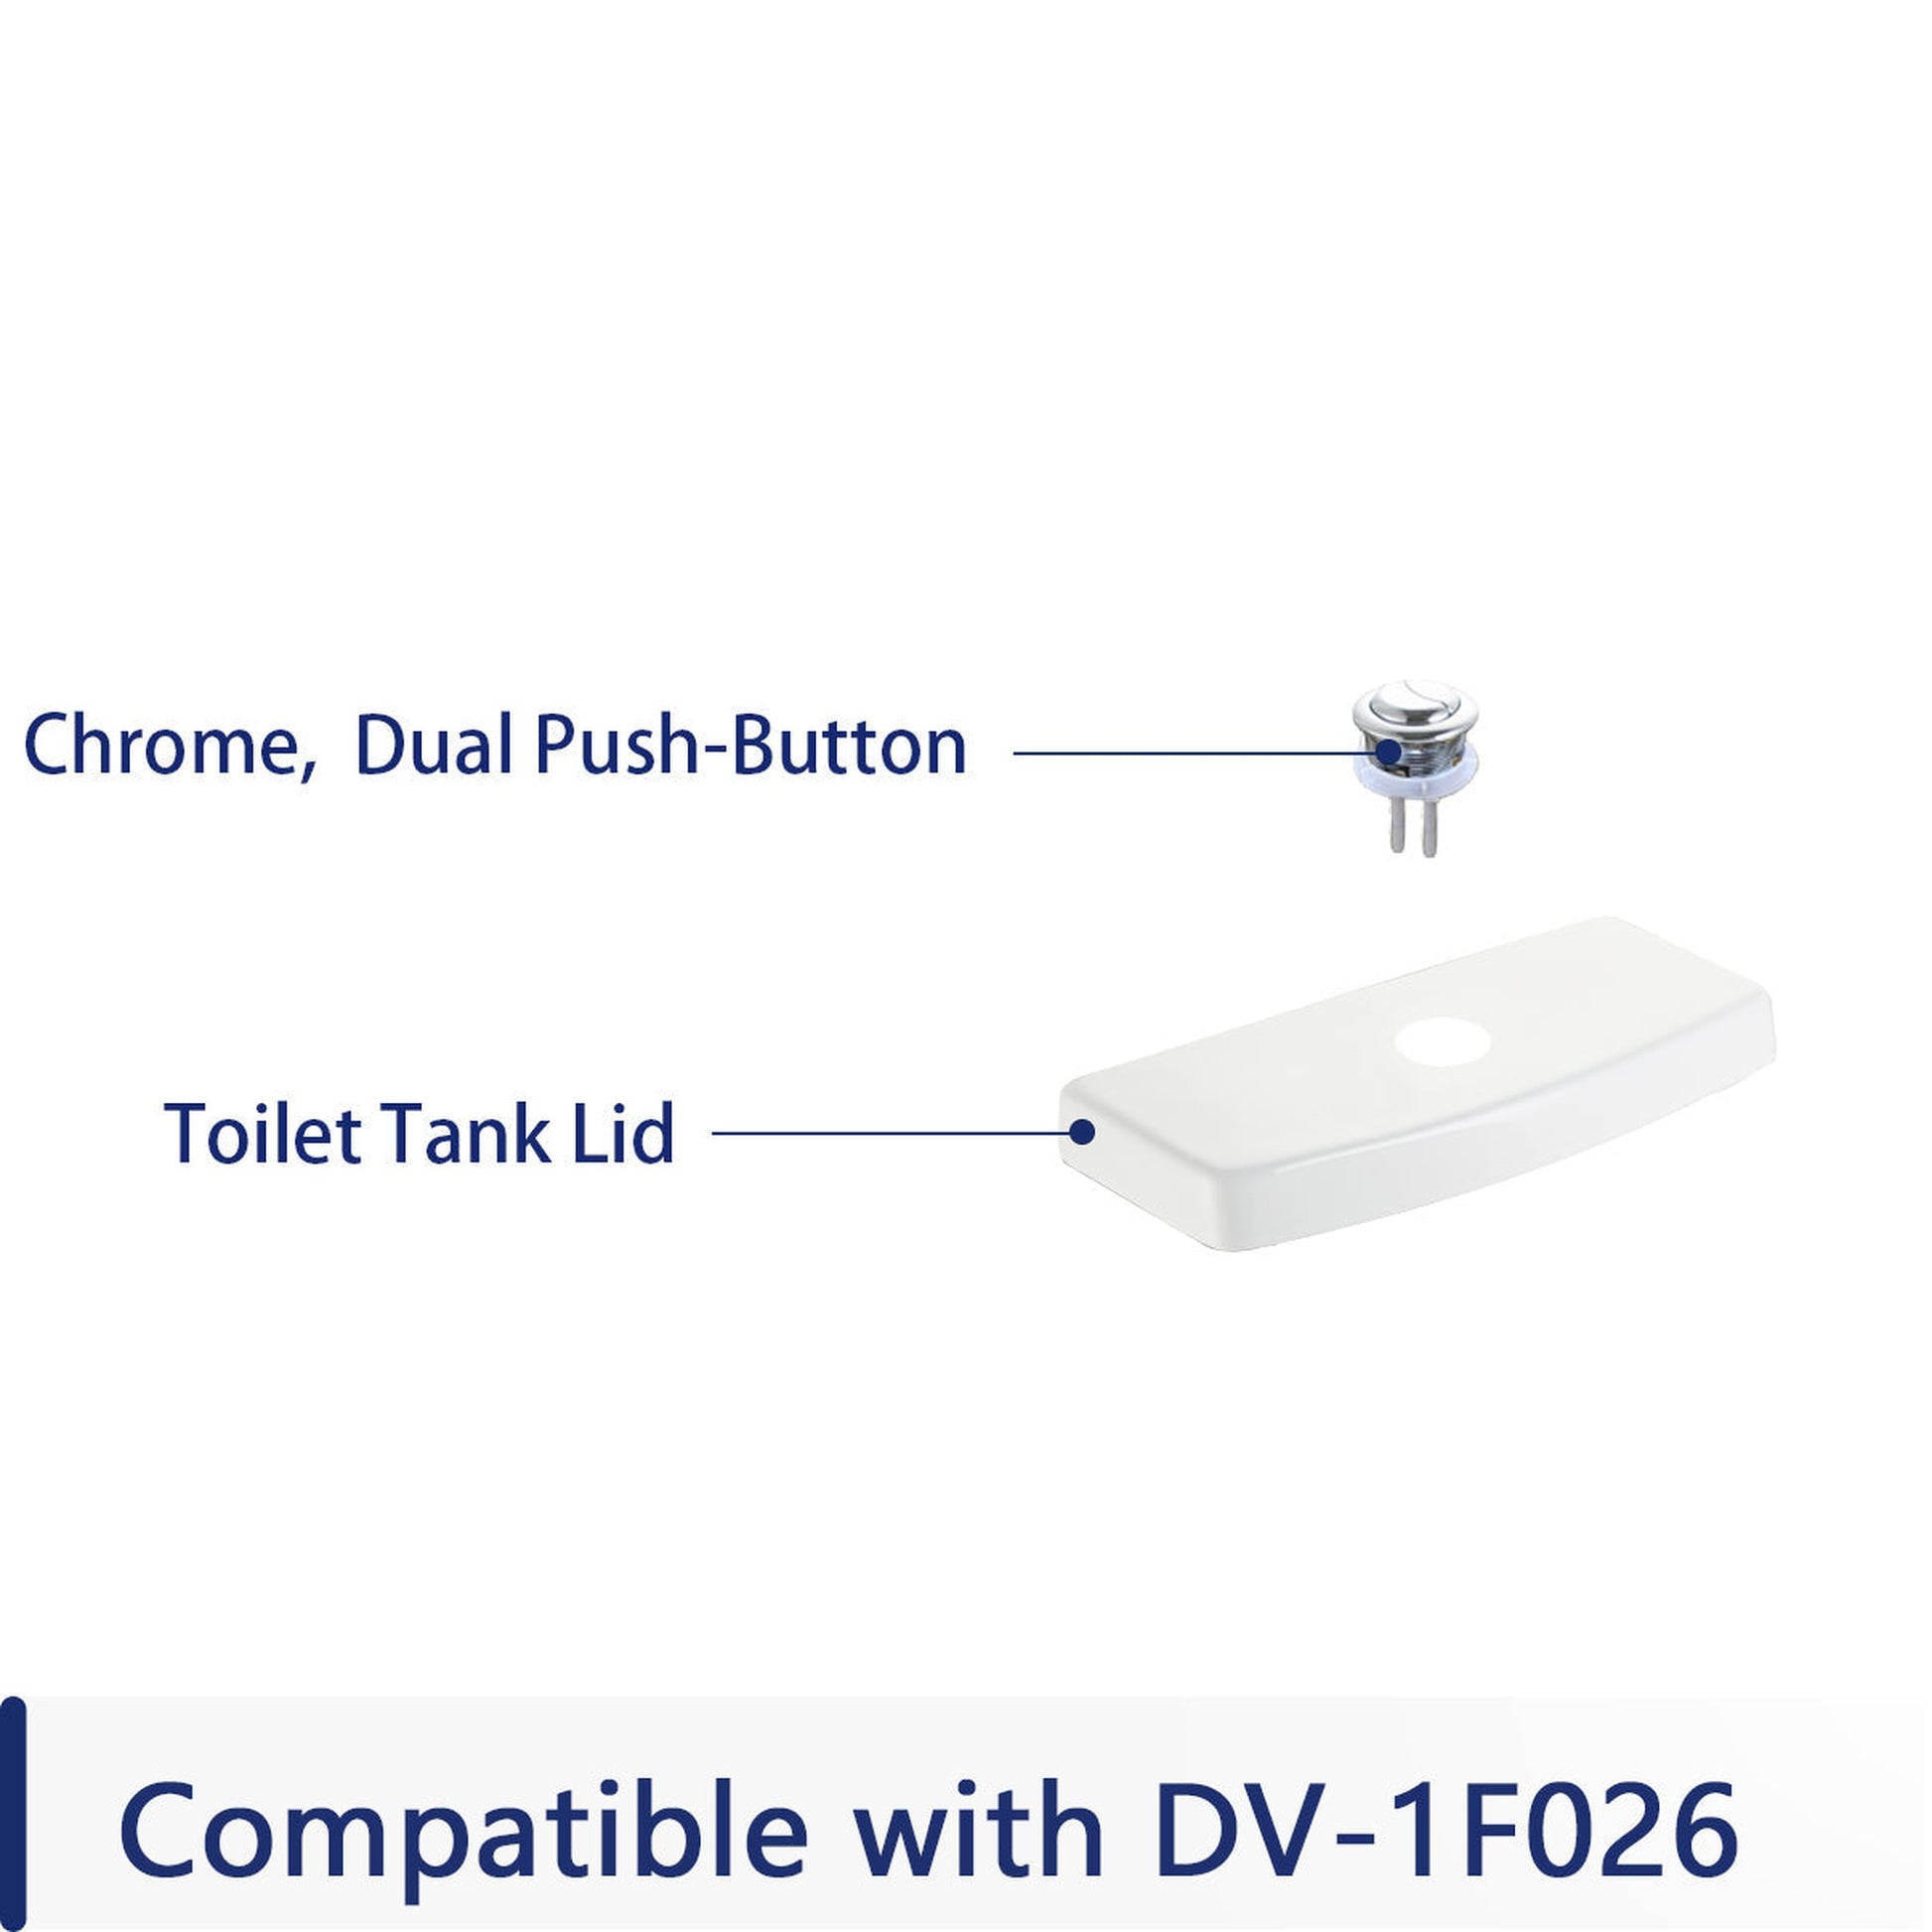 DeerValley Tank Lid (Not with a flush button, compatible with DV-1F026)